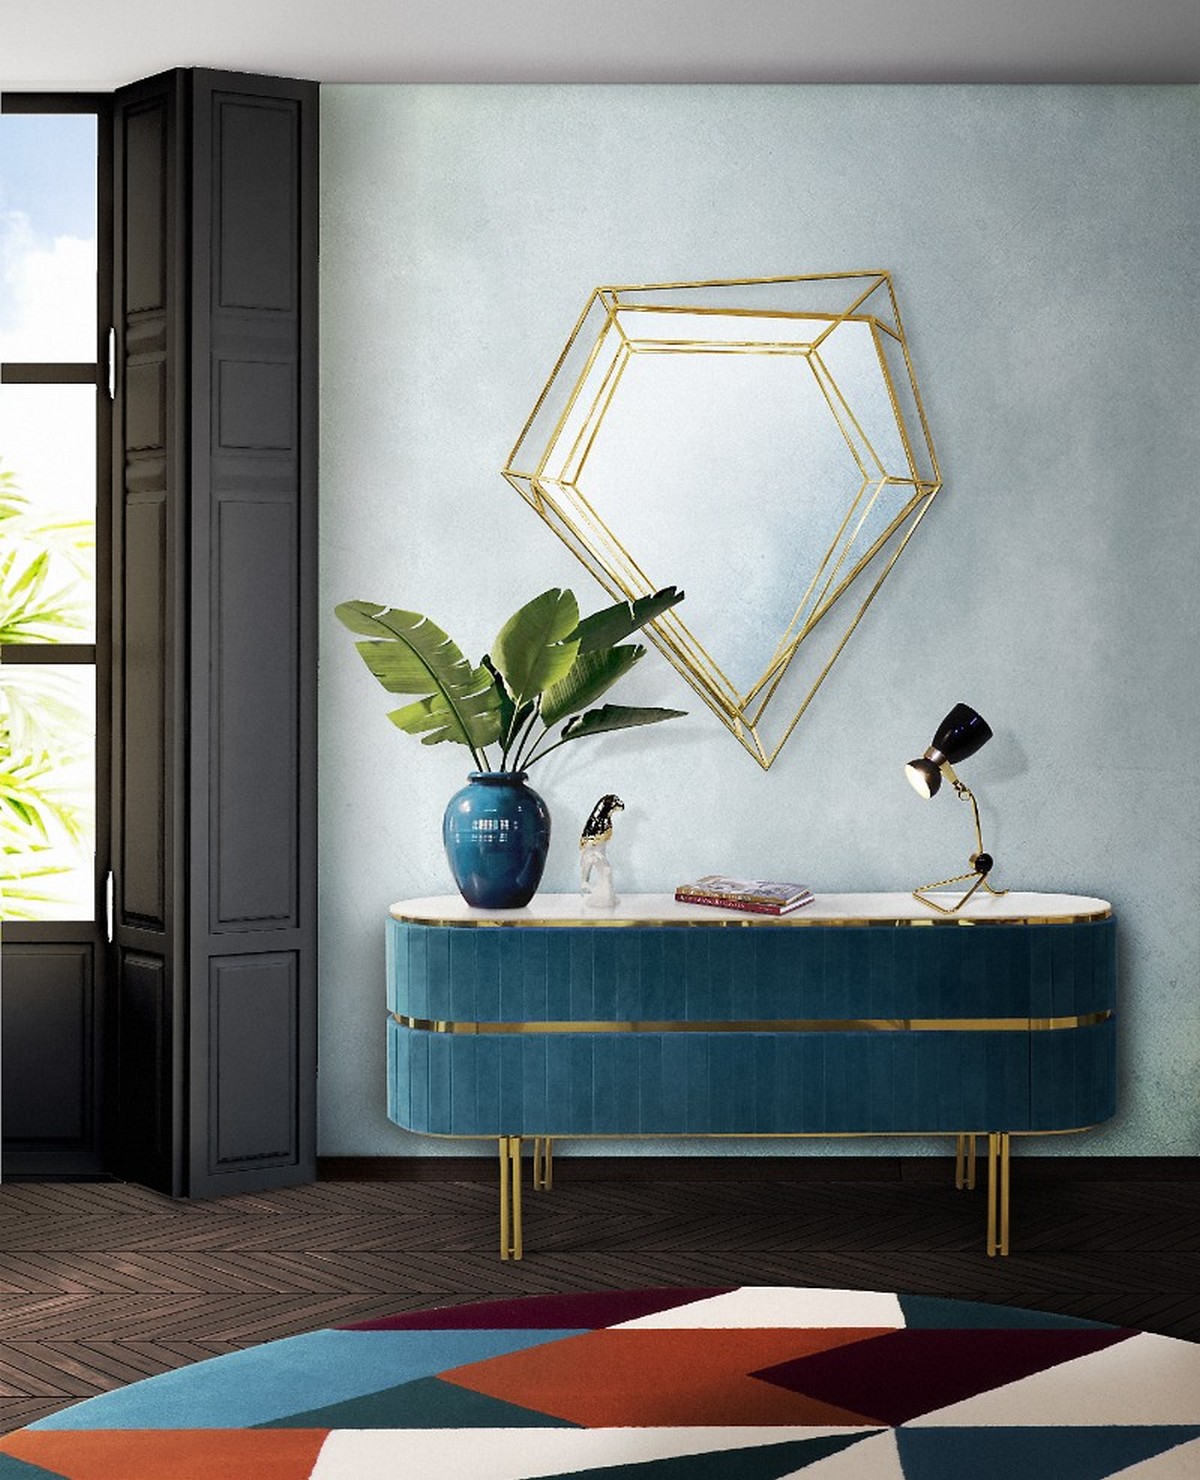 Harmony Through Color? Here's Edith by Essential Home